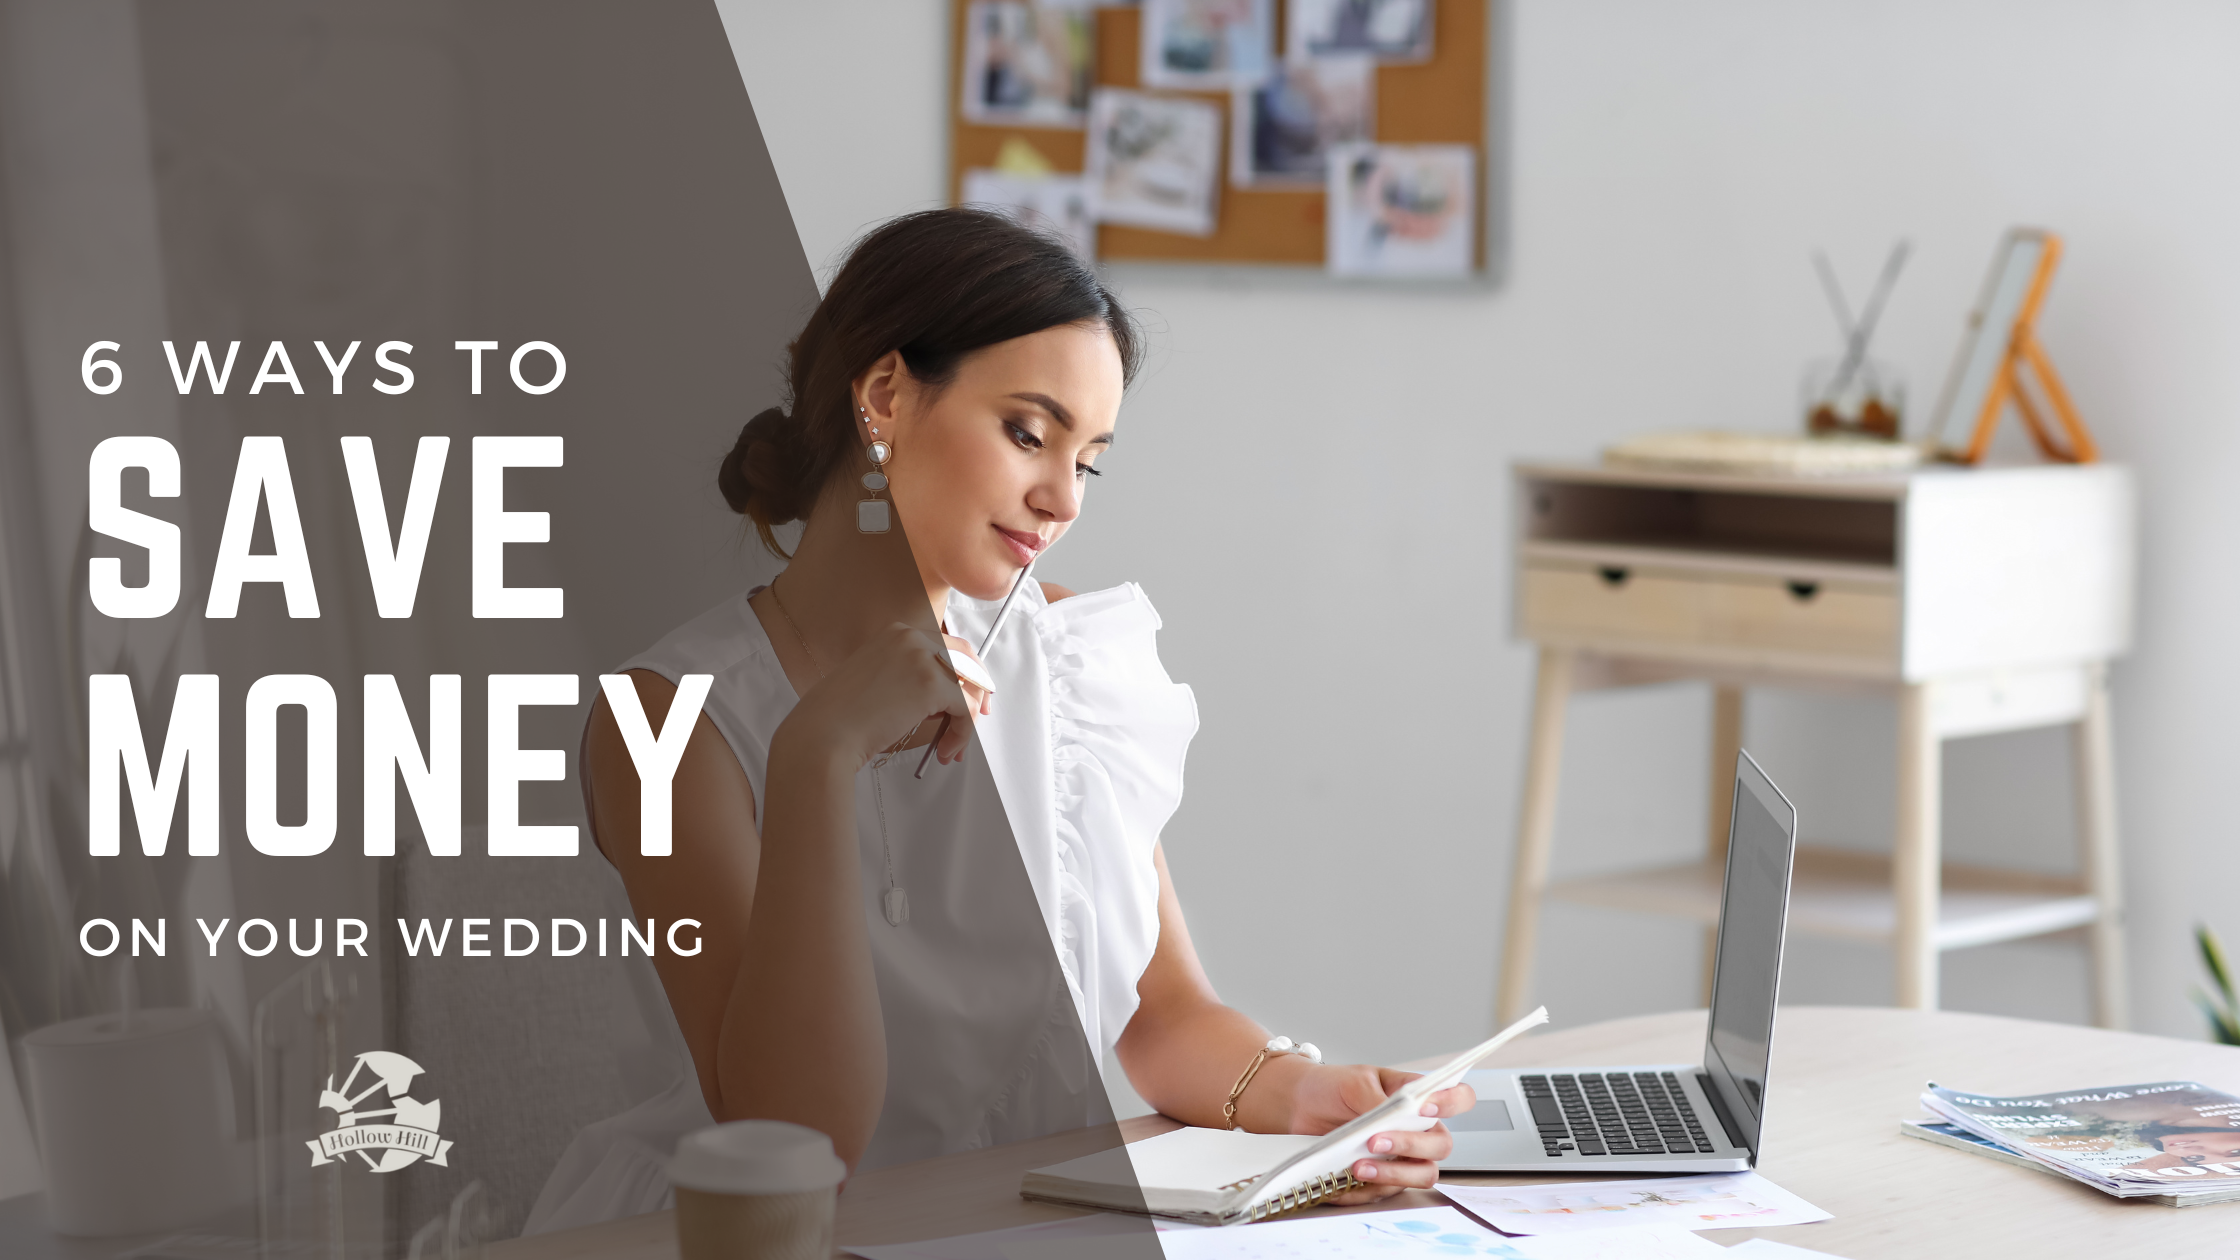 6 Ways To Save Money On Your Wedding